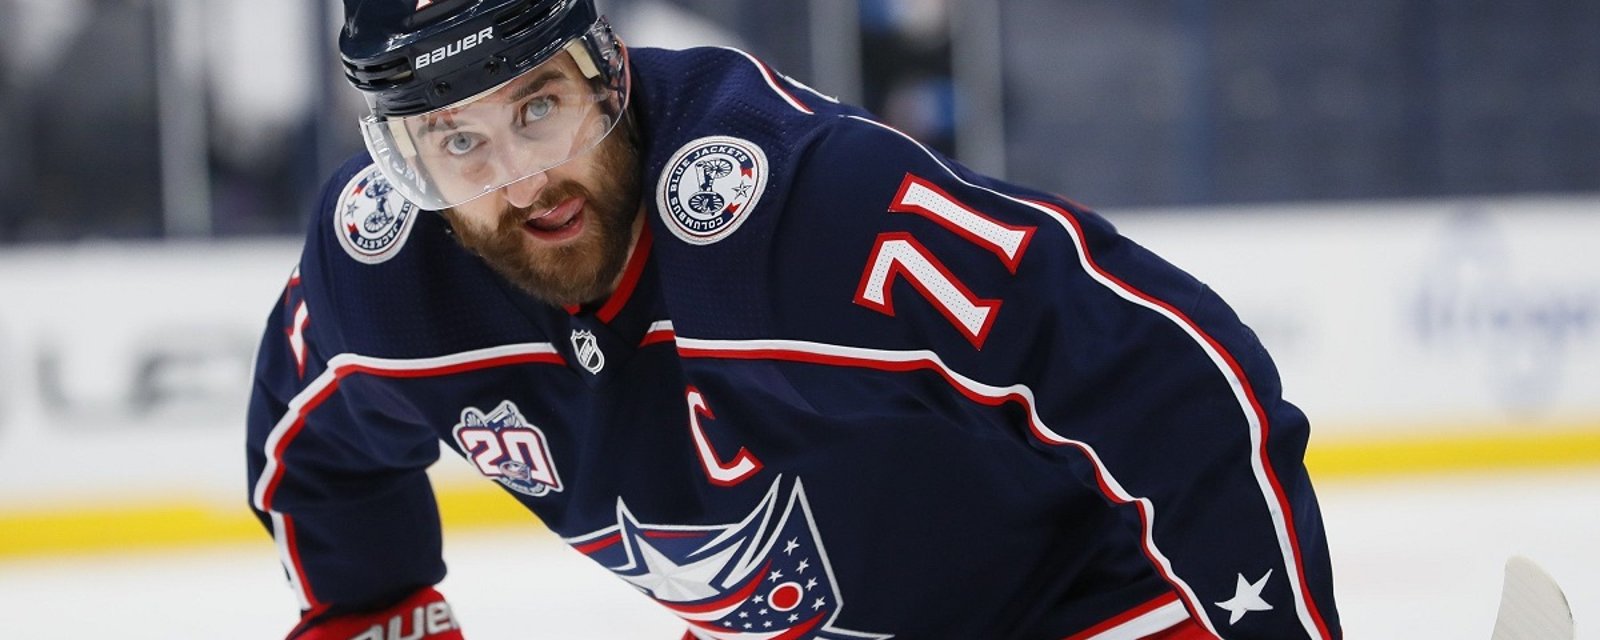 Maple Leafs have acquired Blue Jackets captain Nick Foligno.